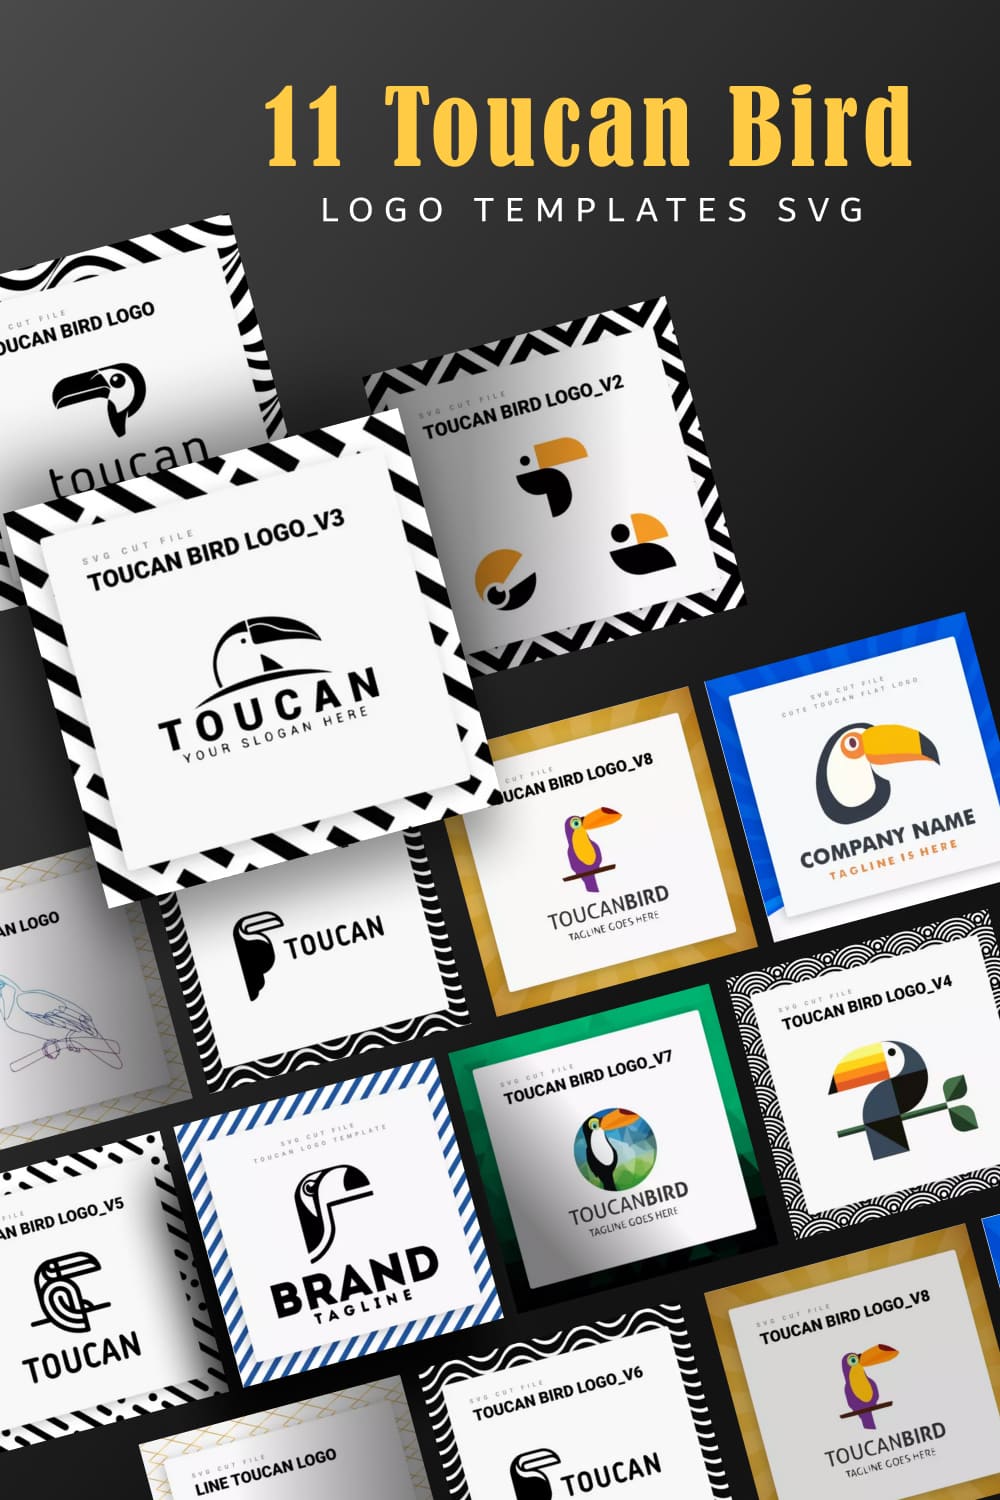 Bunch of business cards with different logos.